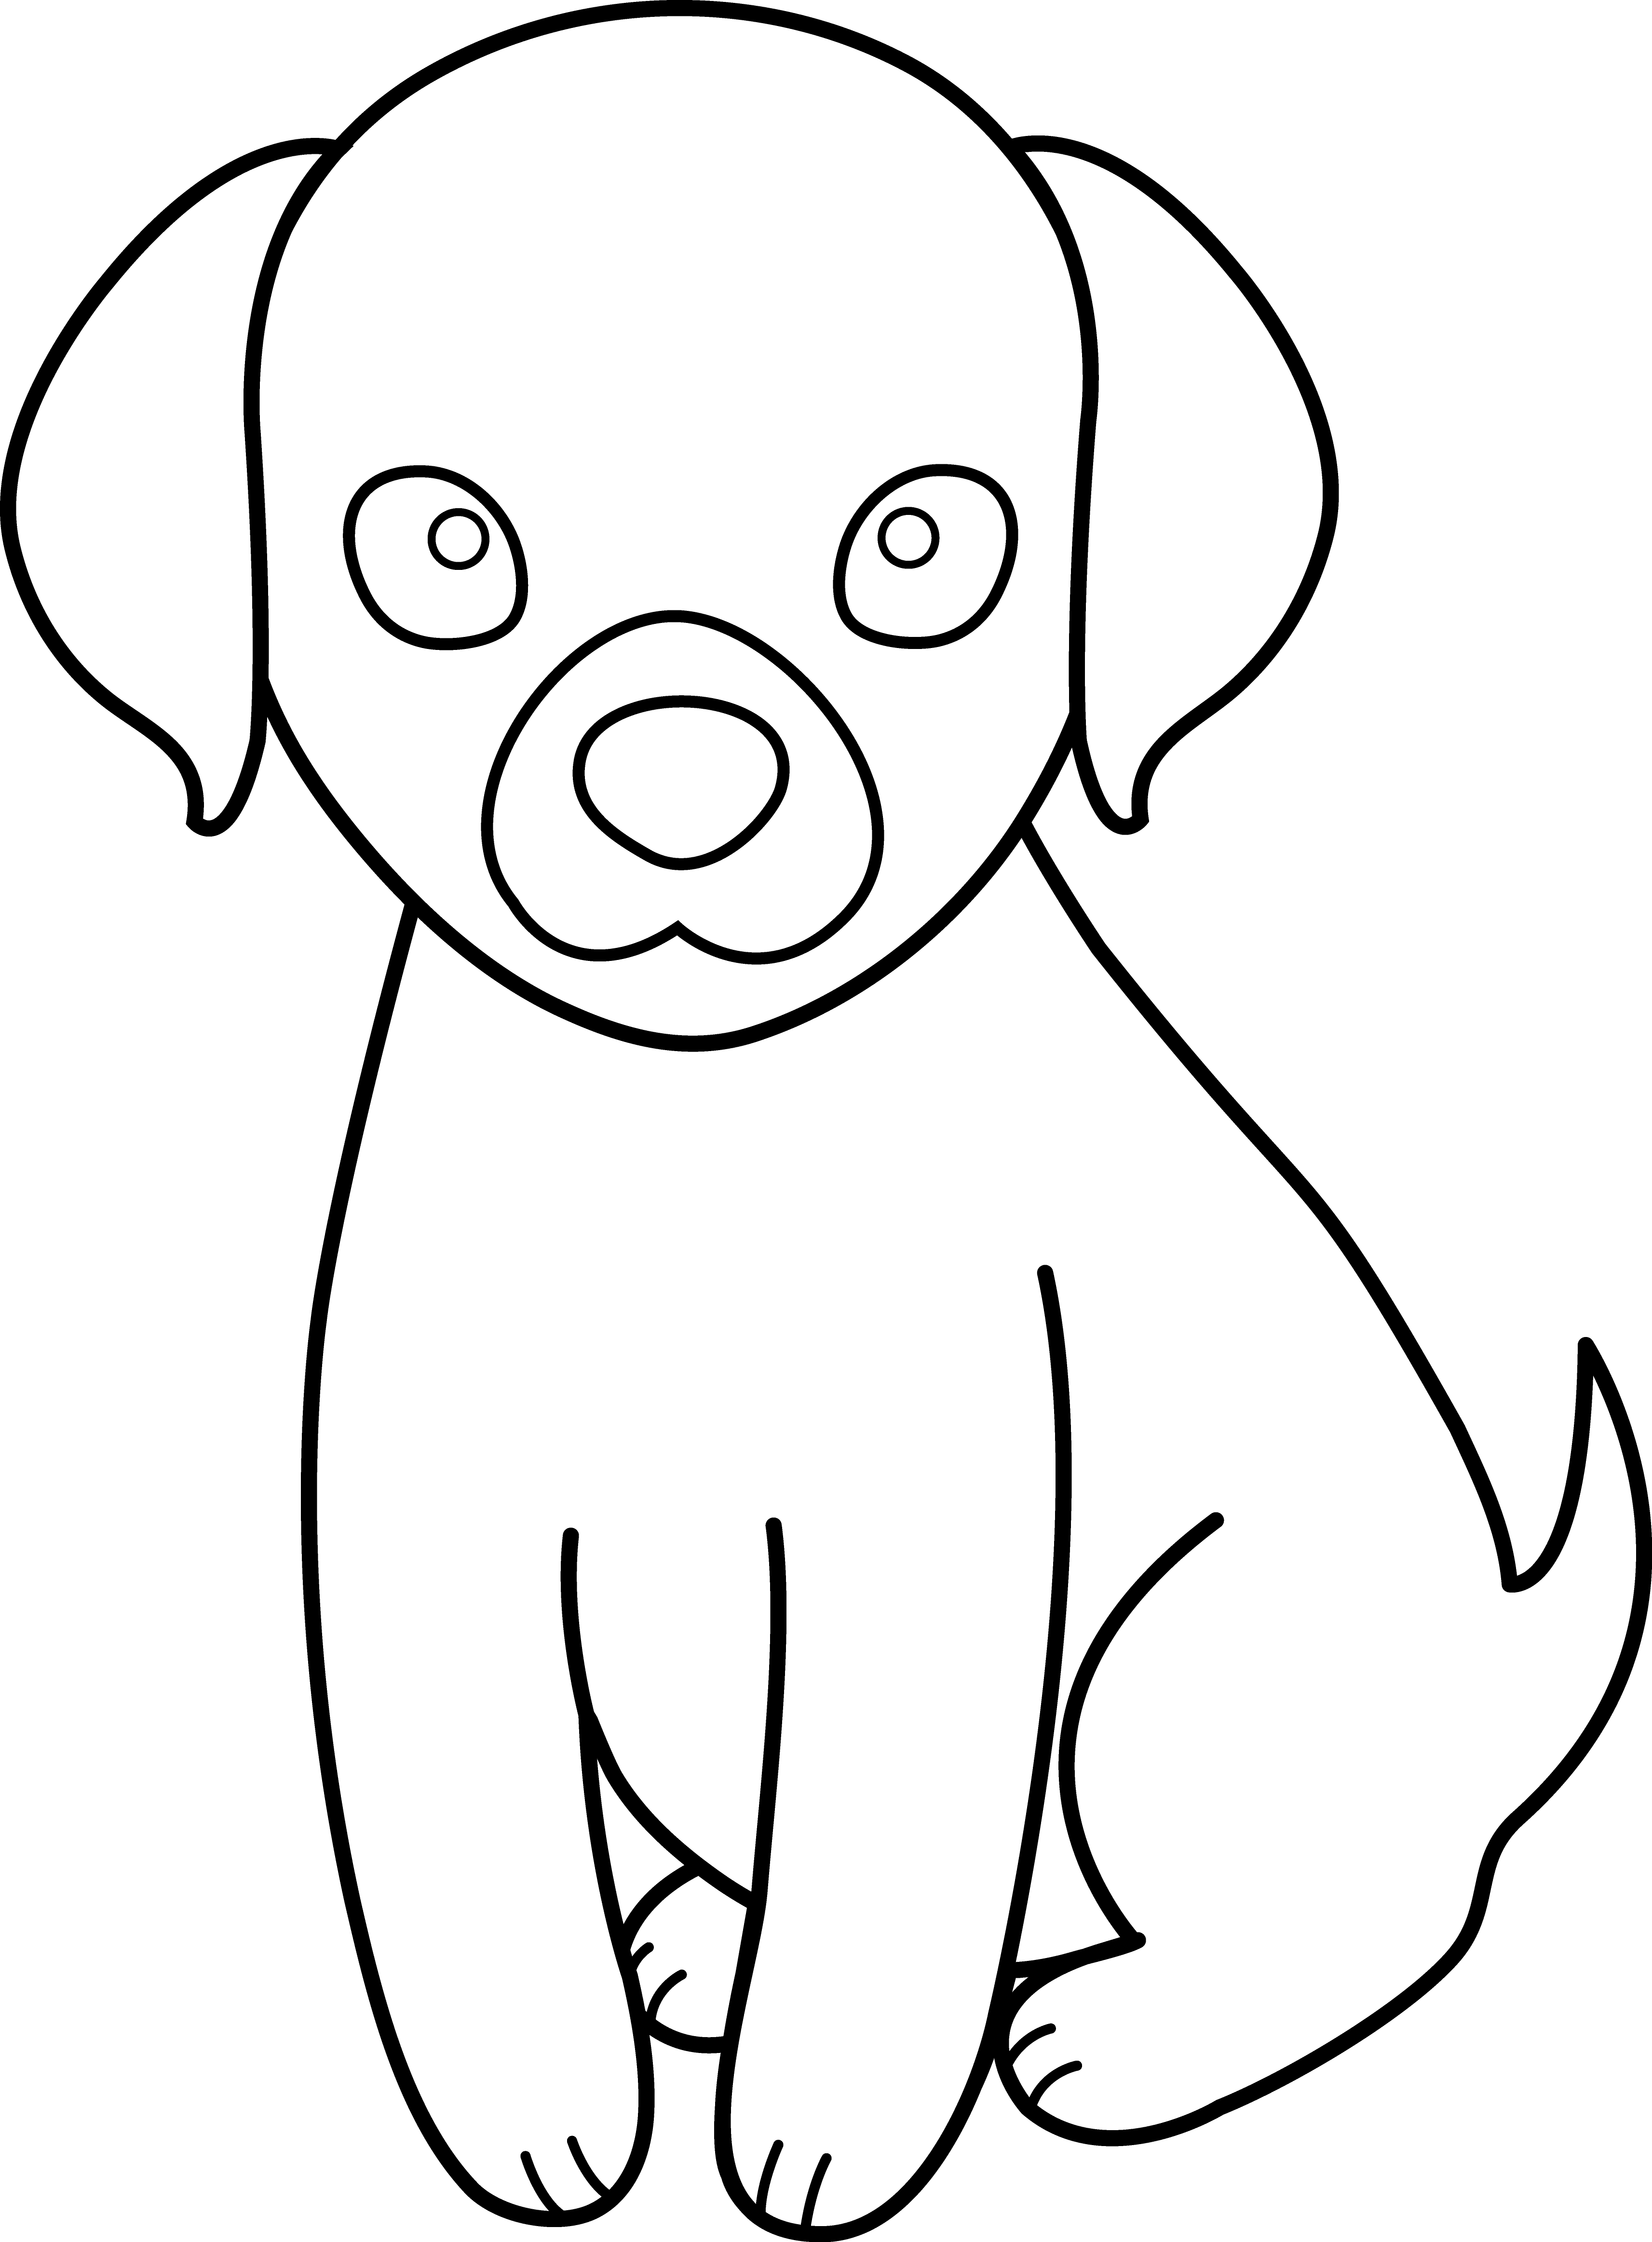 Cute Dog House Clipart | Clipart Panda - Free Clipart Images